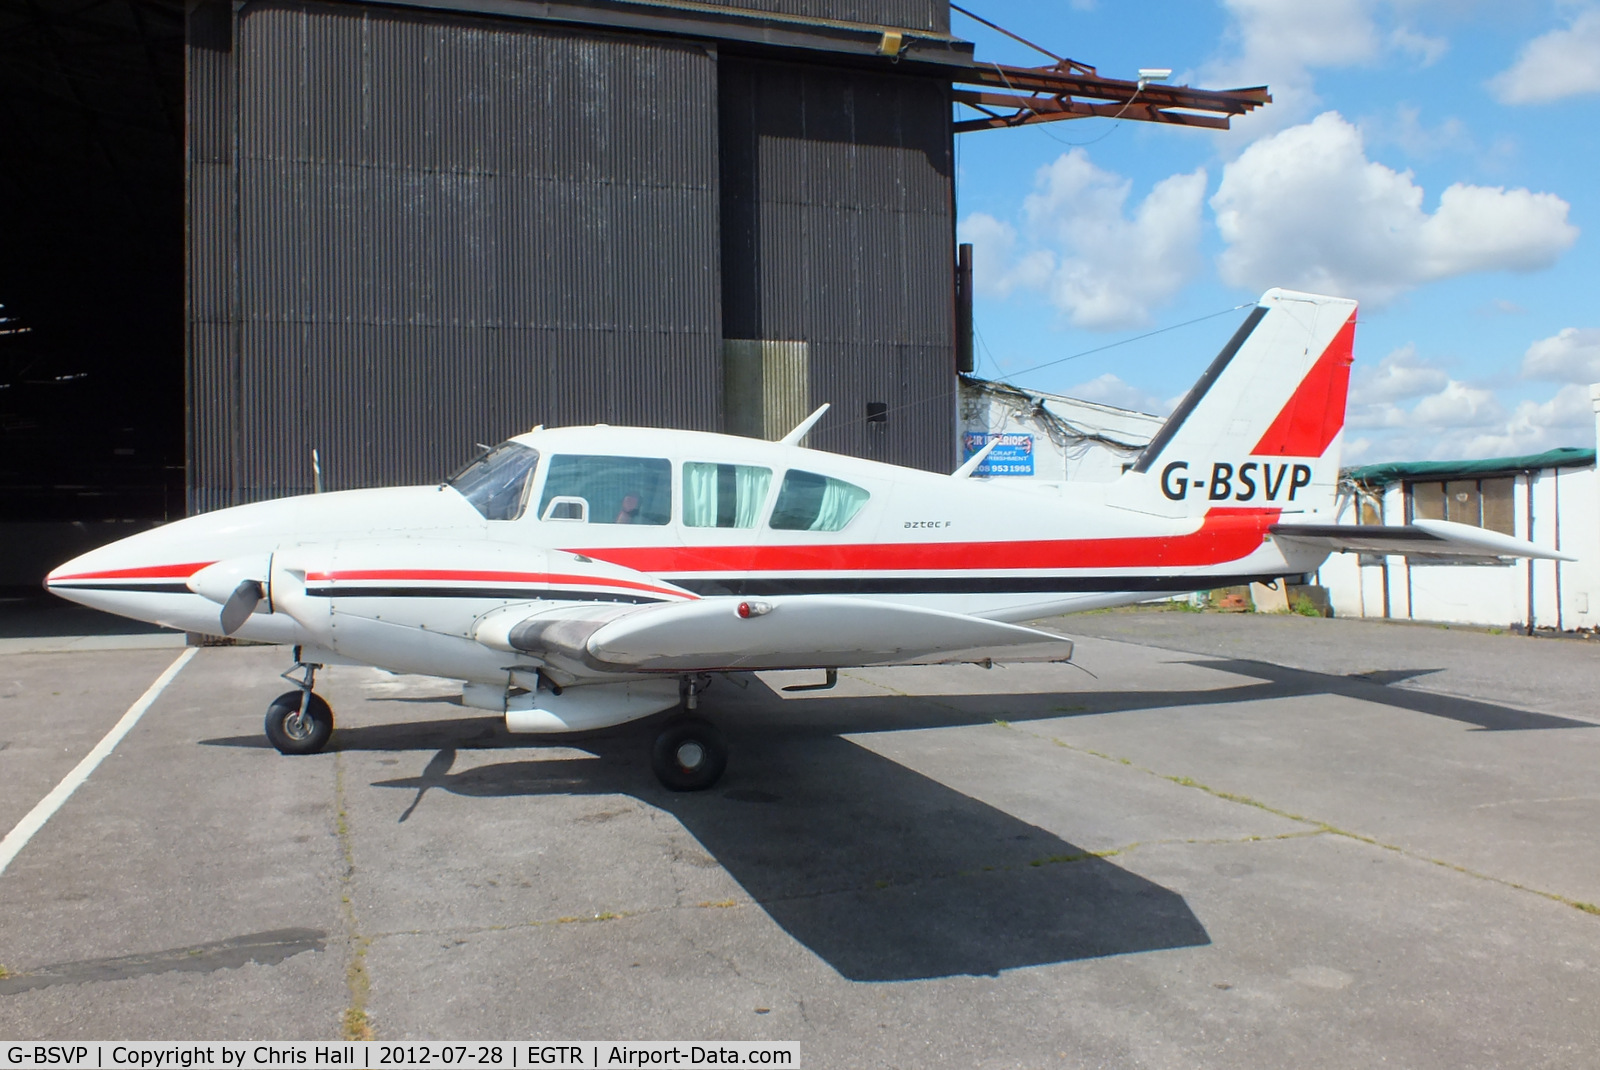 G-BSVP, 1977 Piper PA-23-250 Aztec C/N 27-7754115, privately owned